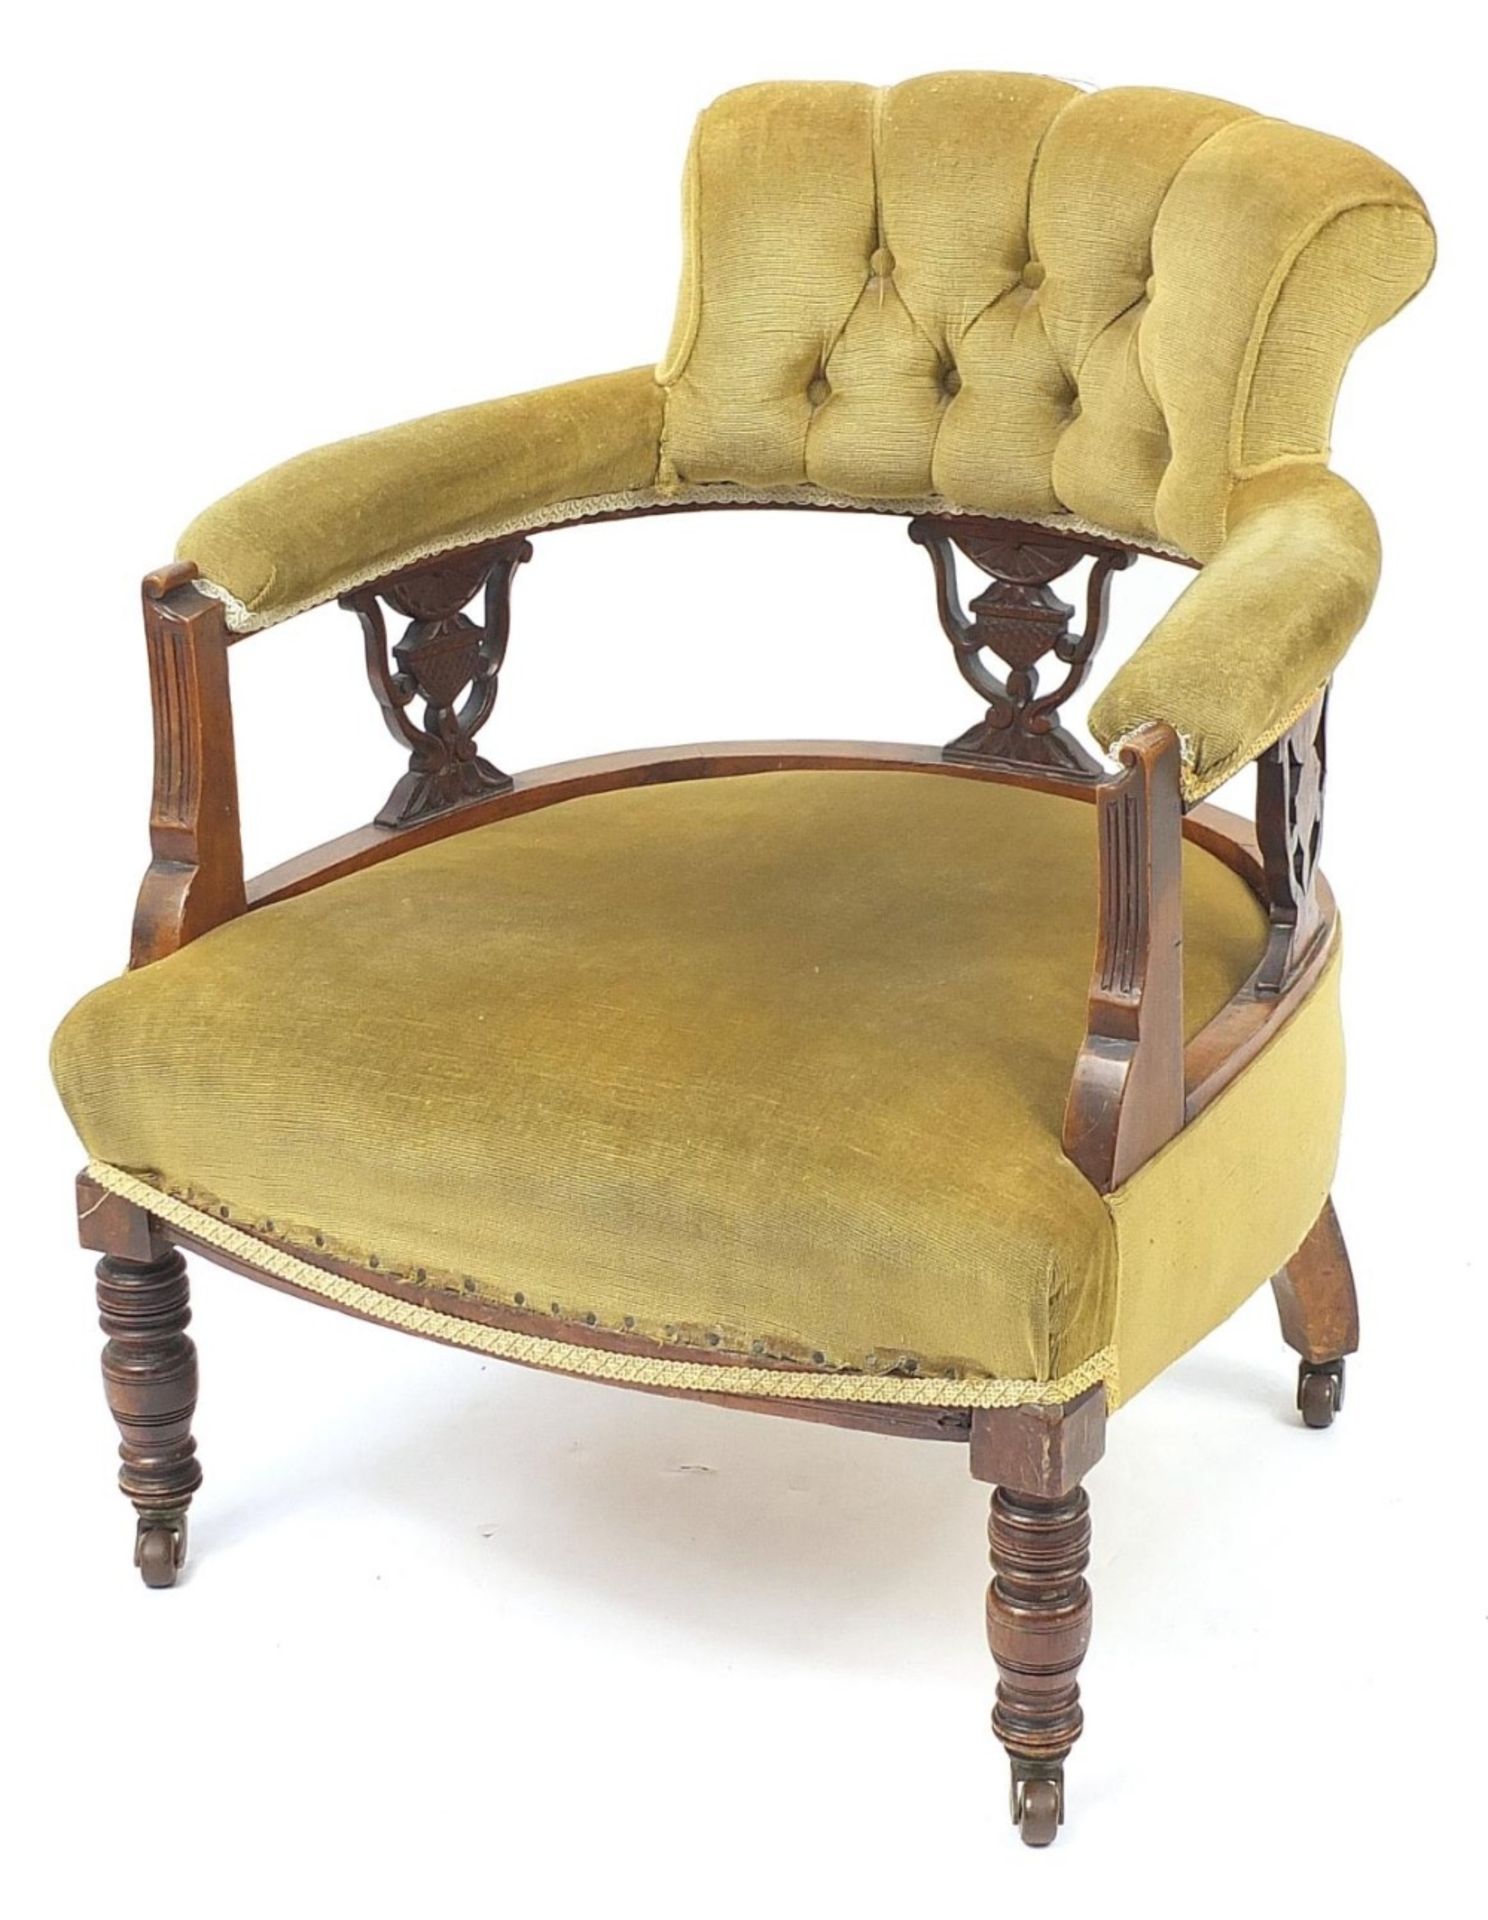 Edwardian carved mahogany bedroom chair with green button back upholstery, 75cm H x 60cm W x 62cm